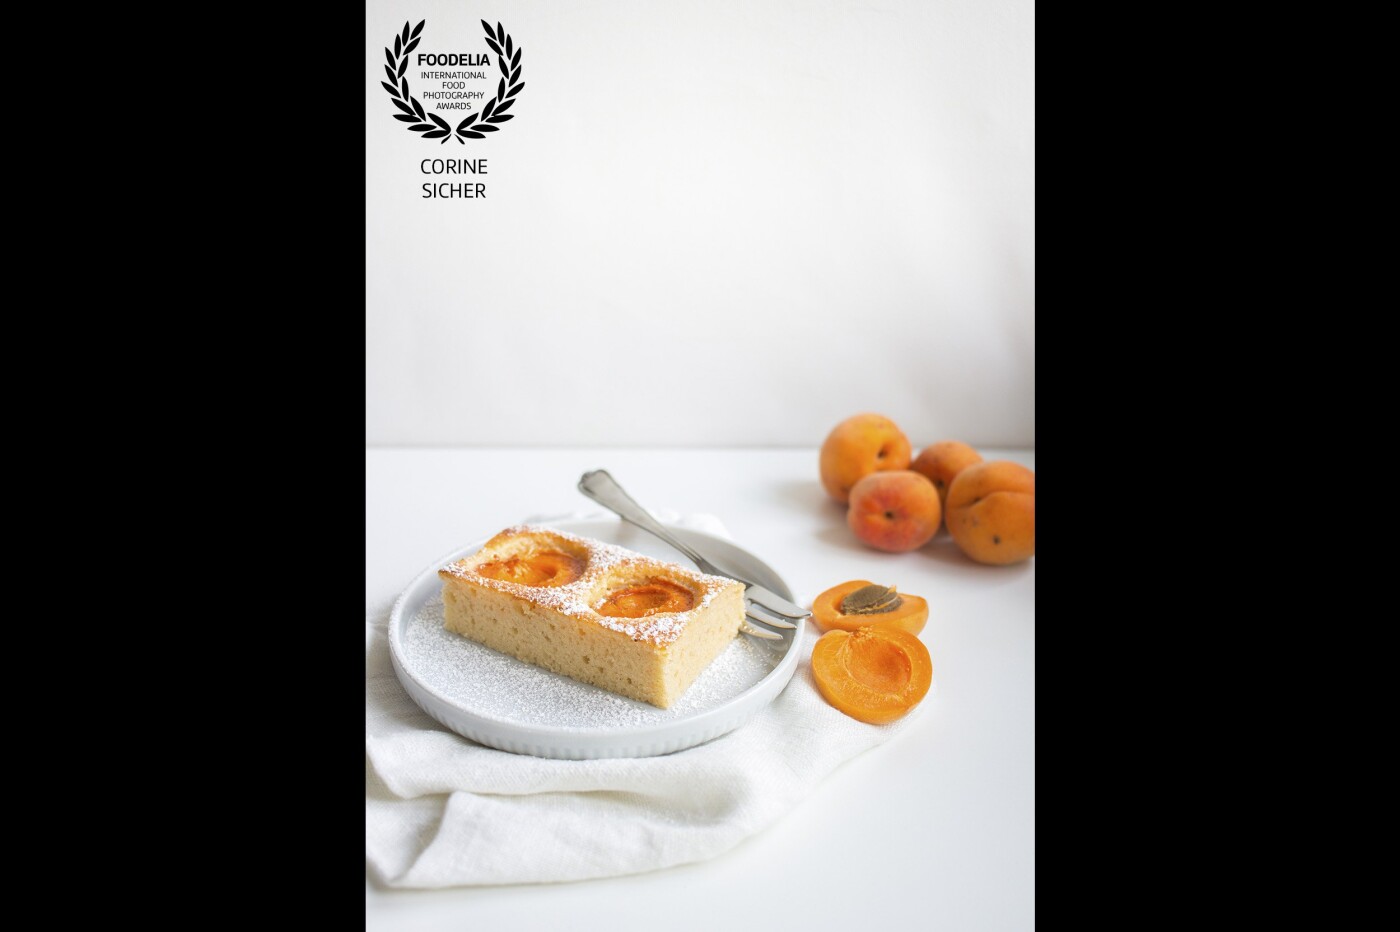 Summertime is apricot time. The fragrant of a fresh-baked fluffy and sugar-free apricot cake is some of the best - Picture shot by natural light, straight out of the camera. 